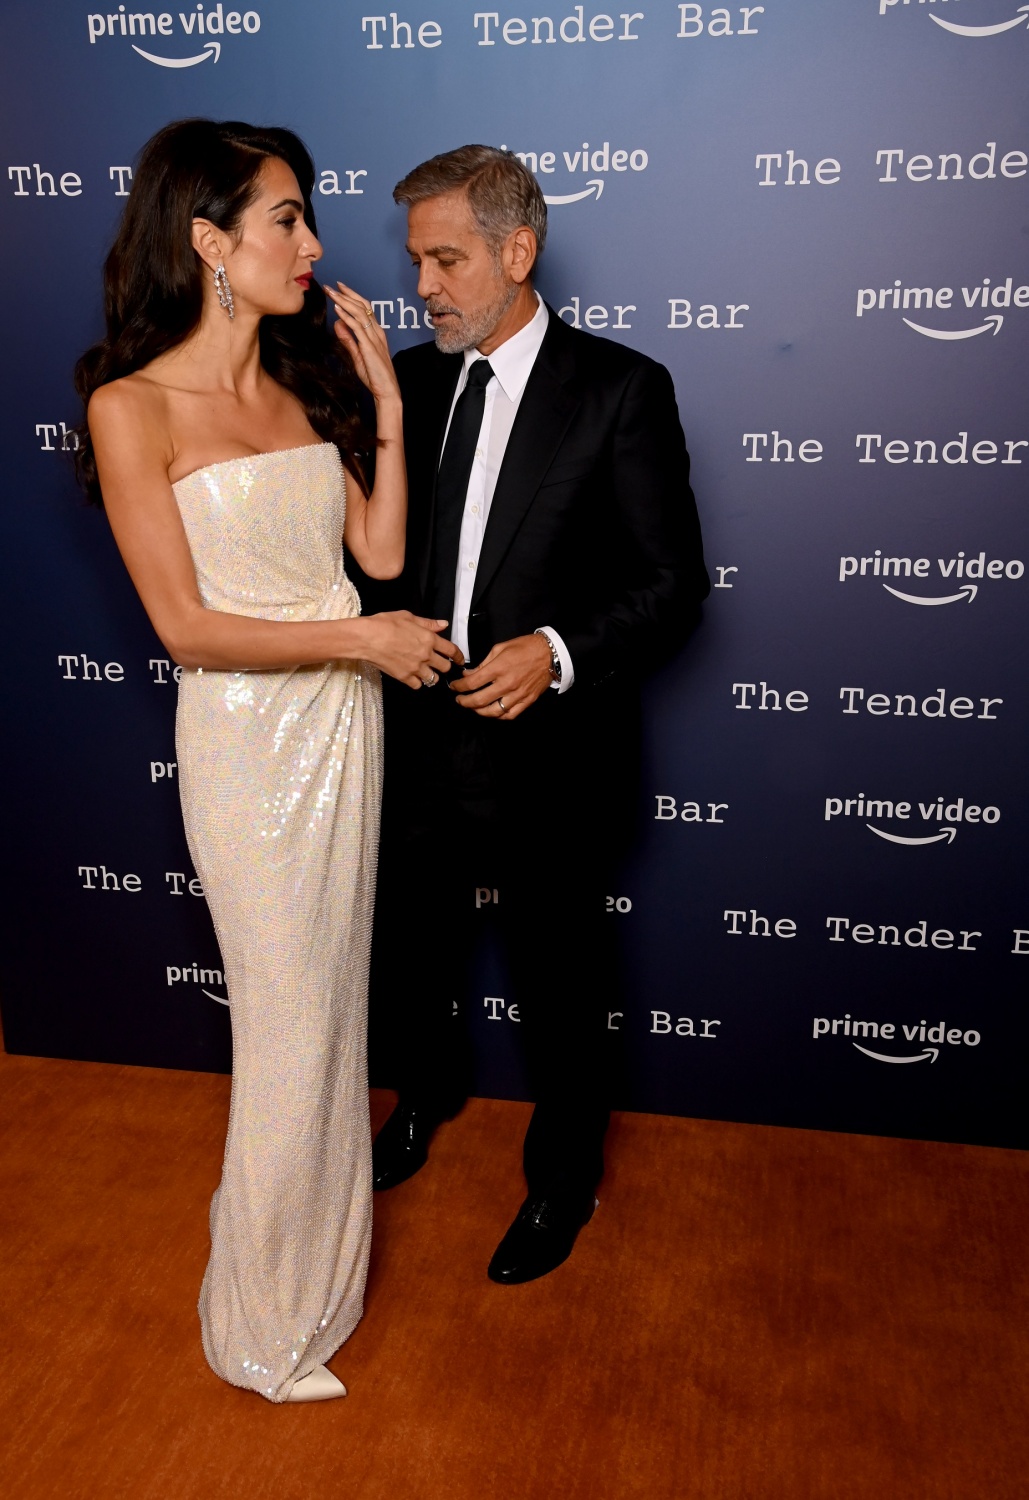 Amal Clooney and George Clooney attend "The Tender Bar" photocall during the 65th BFI London Film Festival at NoMad London on October 10, 2021 in London, England. 